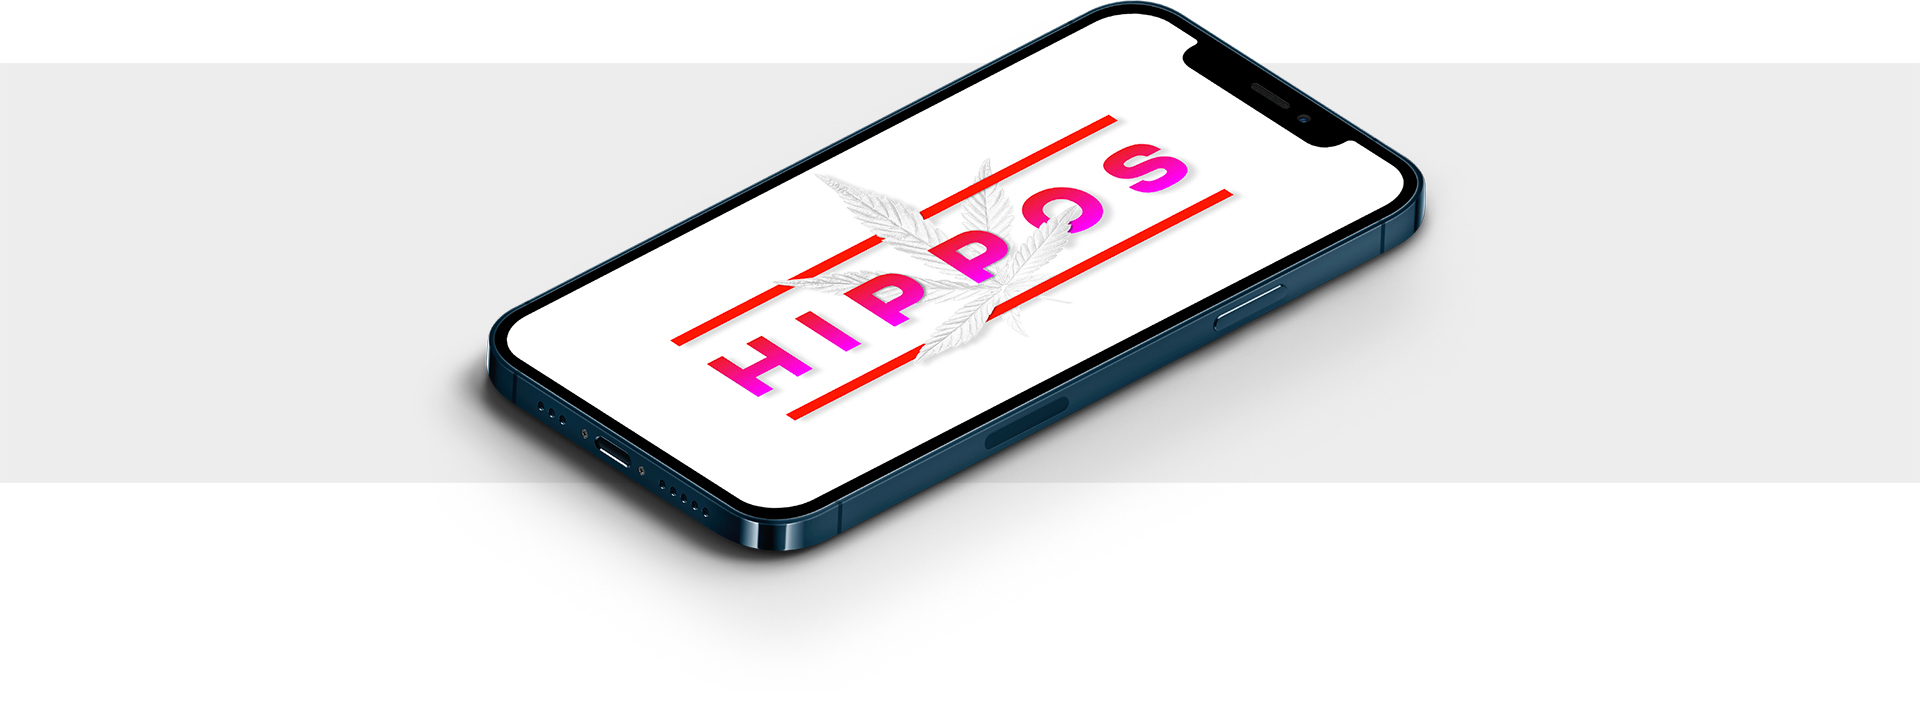 Hippos Weed Dispensary Logo On Mobile